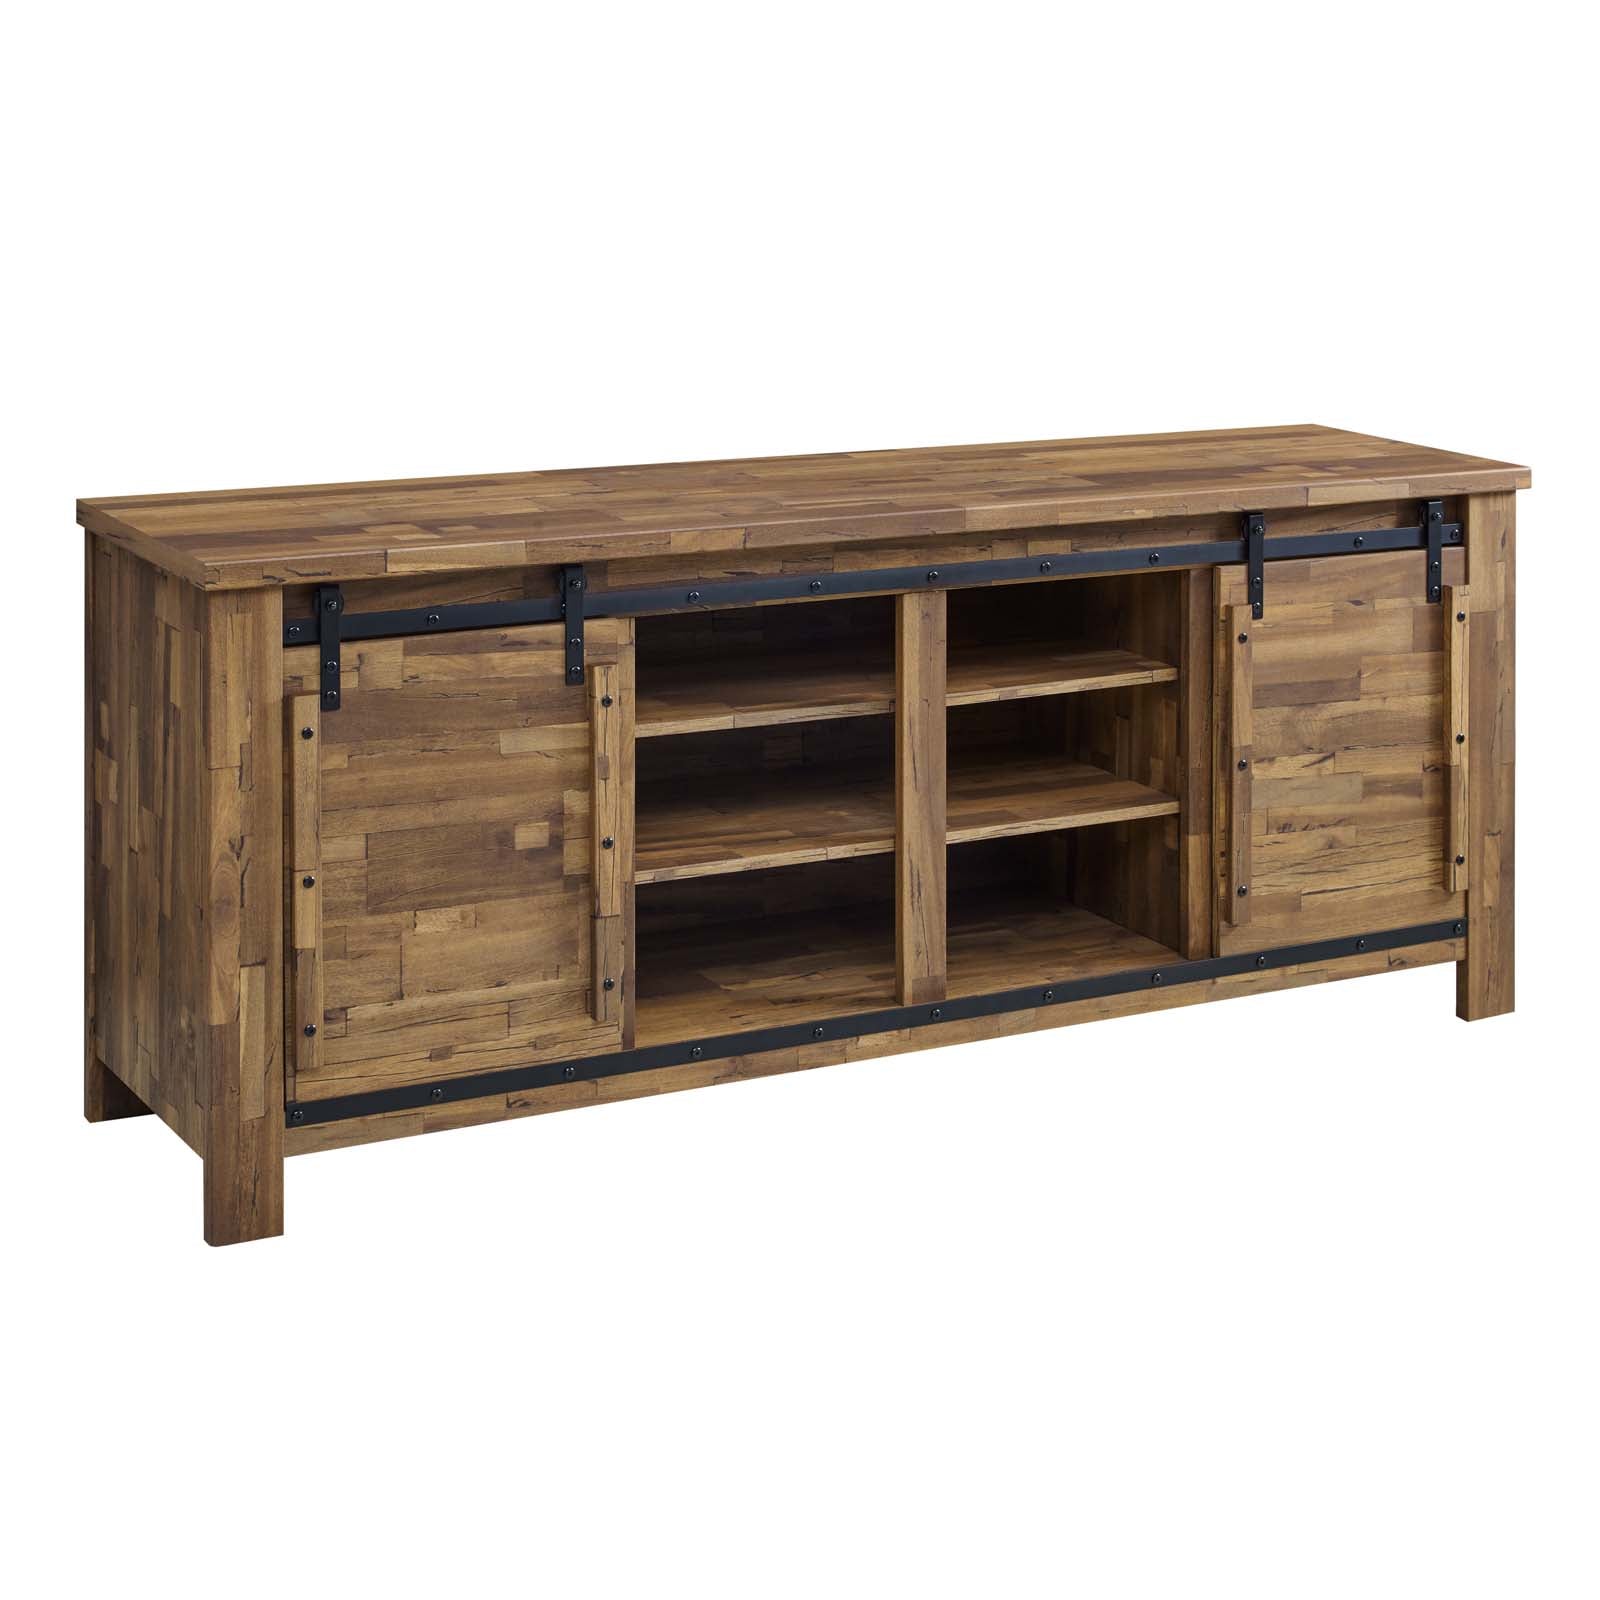 Cheshire 71" Rustic Sliding Door TV Stand - East Shore Modern Home Furnishings